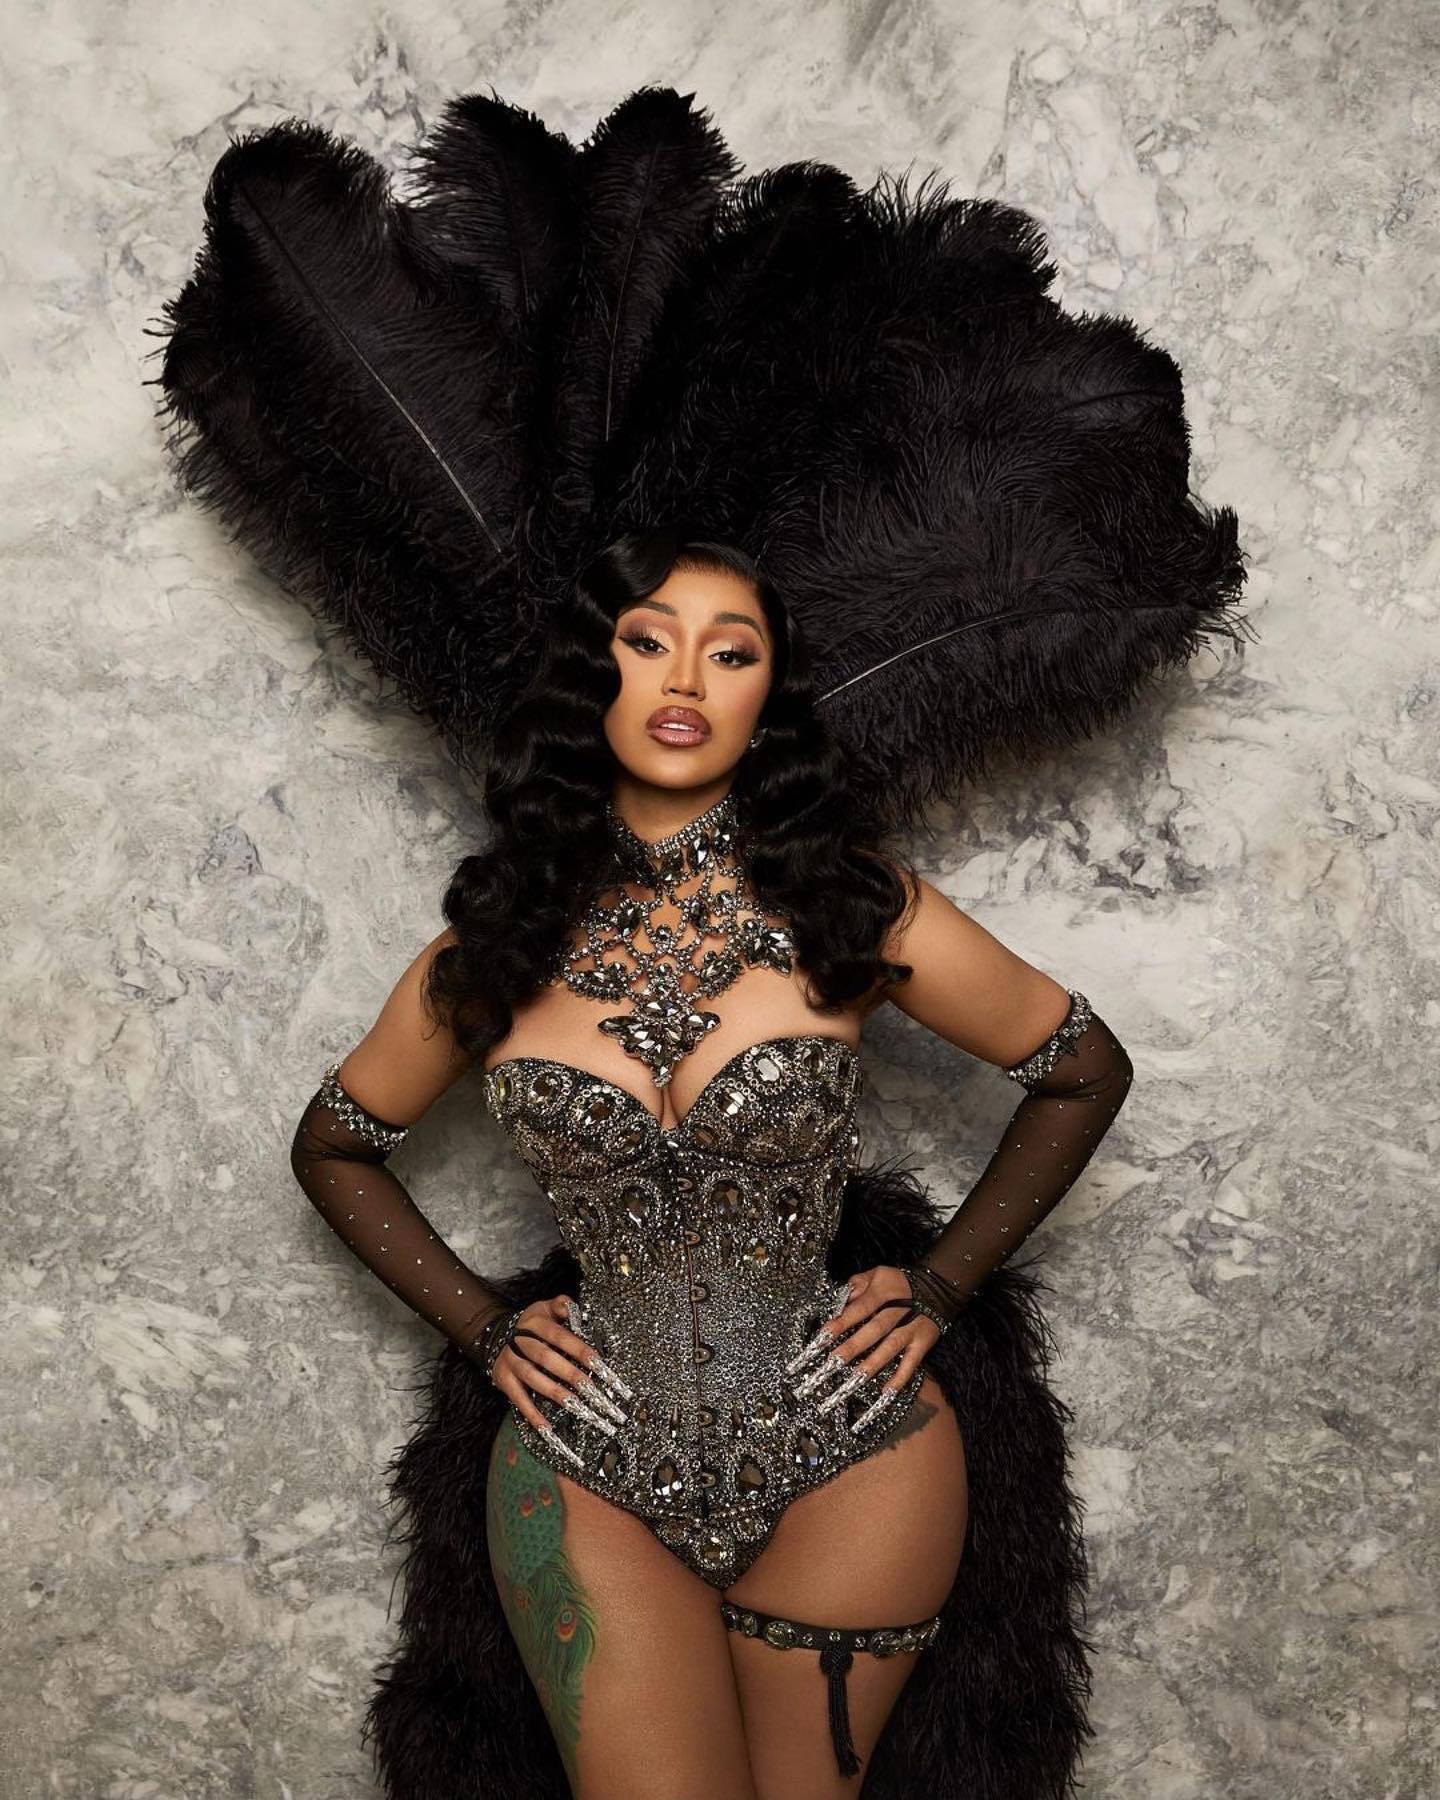 Cardi B Reveals a Second Burlesque Look that Didn’t Make It to Her Party